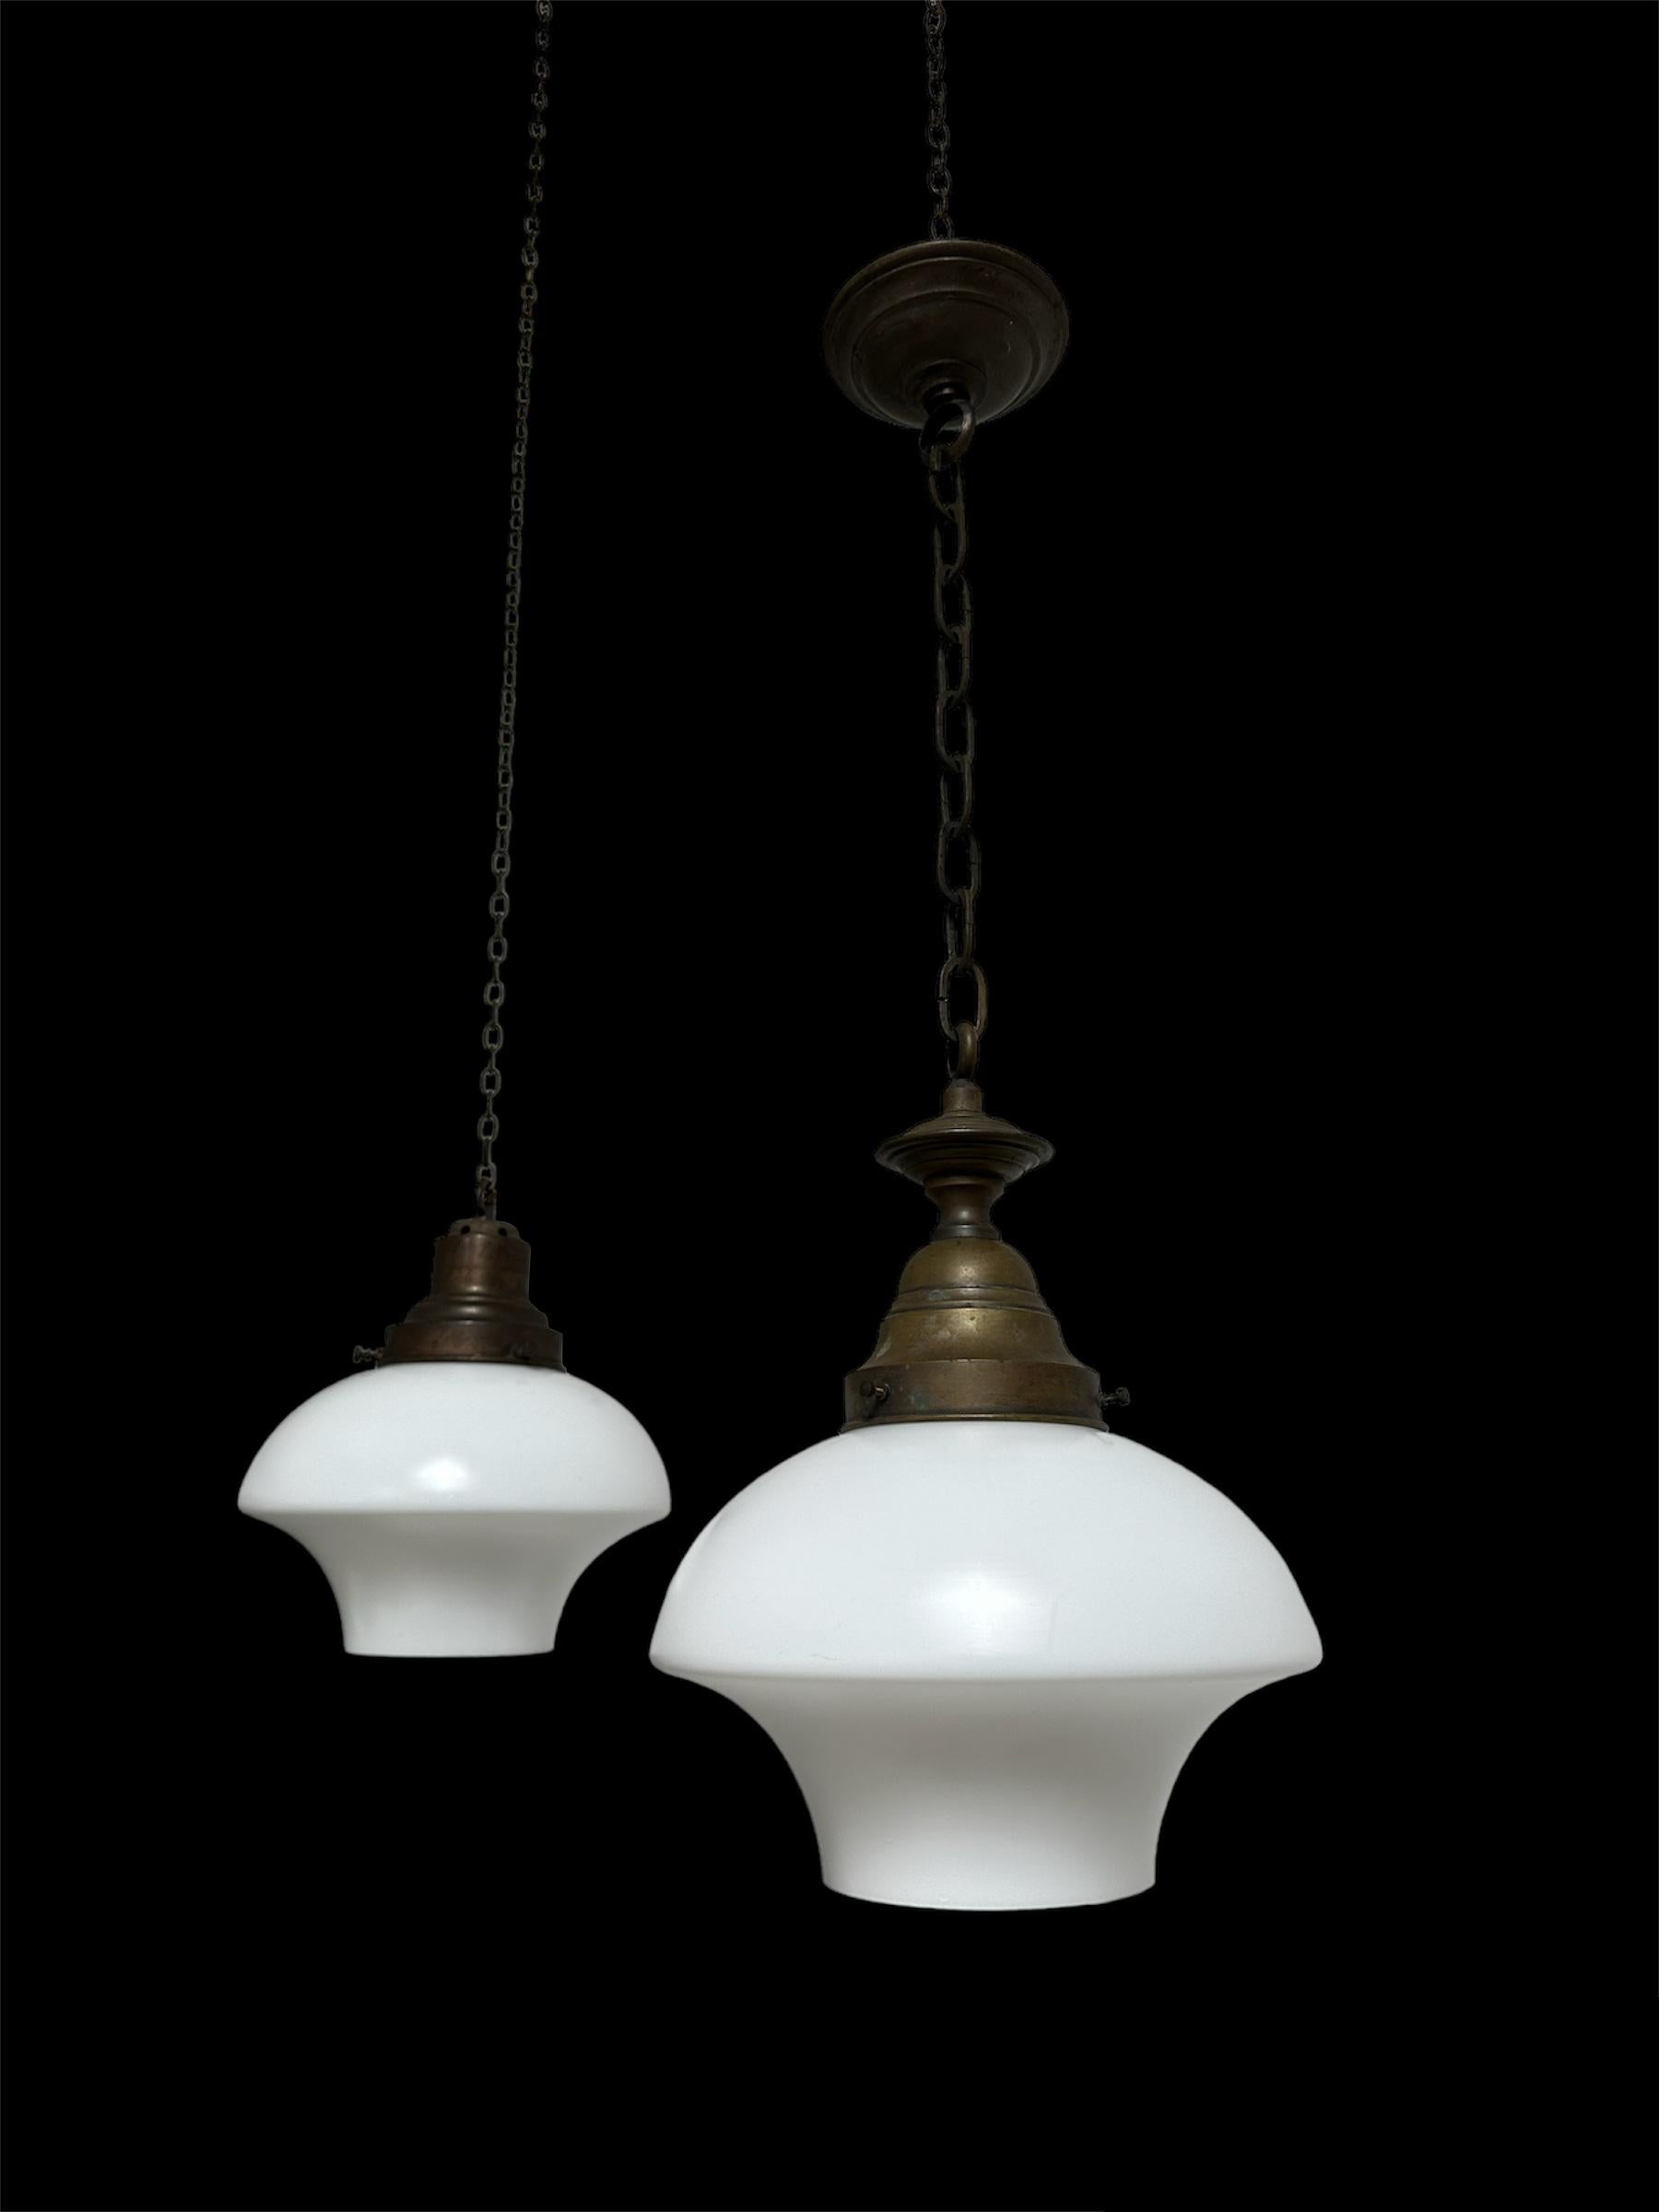 Antique Vintage Art Deco Church Opaline Milk Glass Ceiling Pendant Light Lamp In Good Condition For Sale In Sale, GB